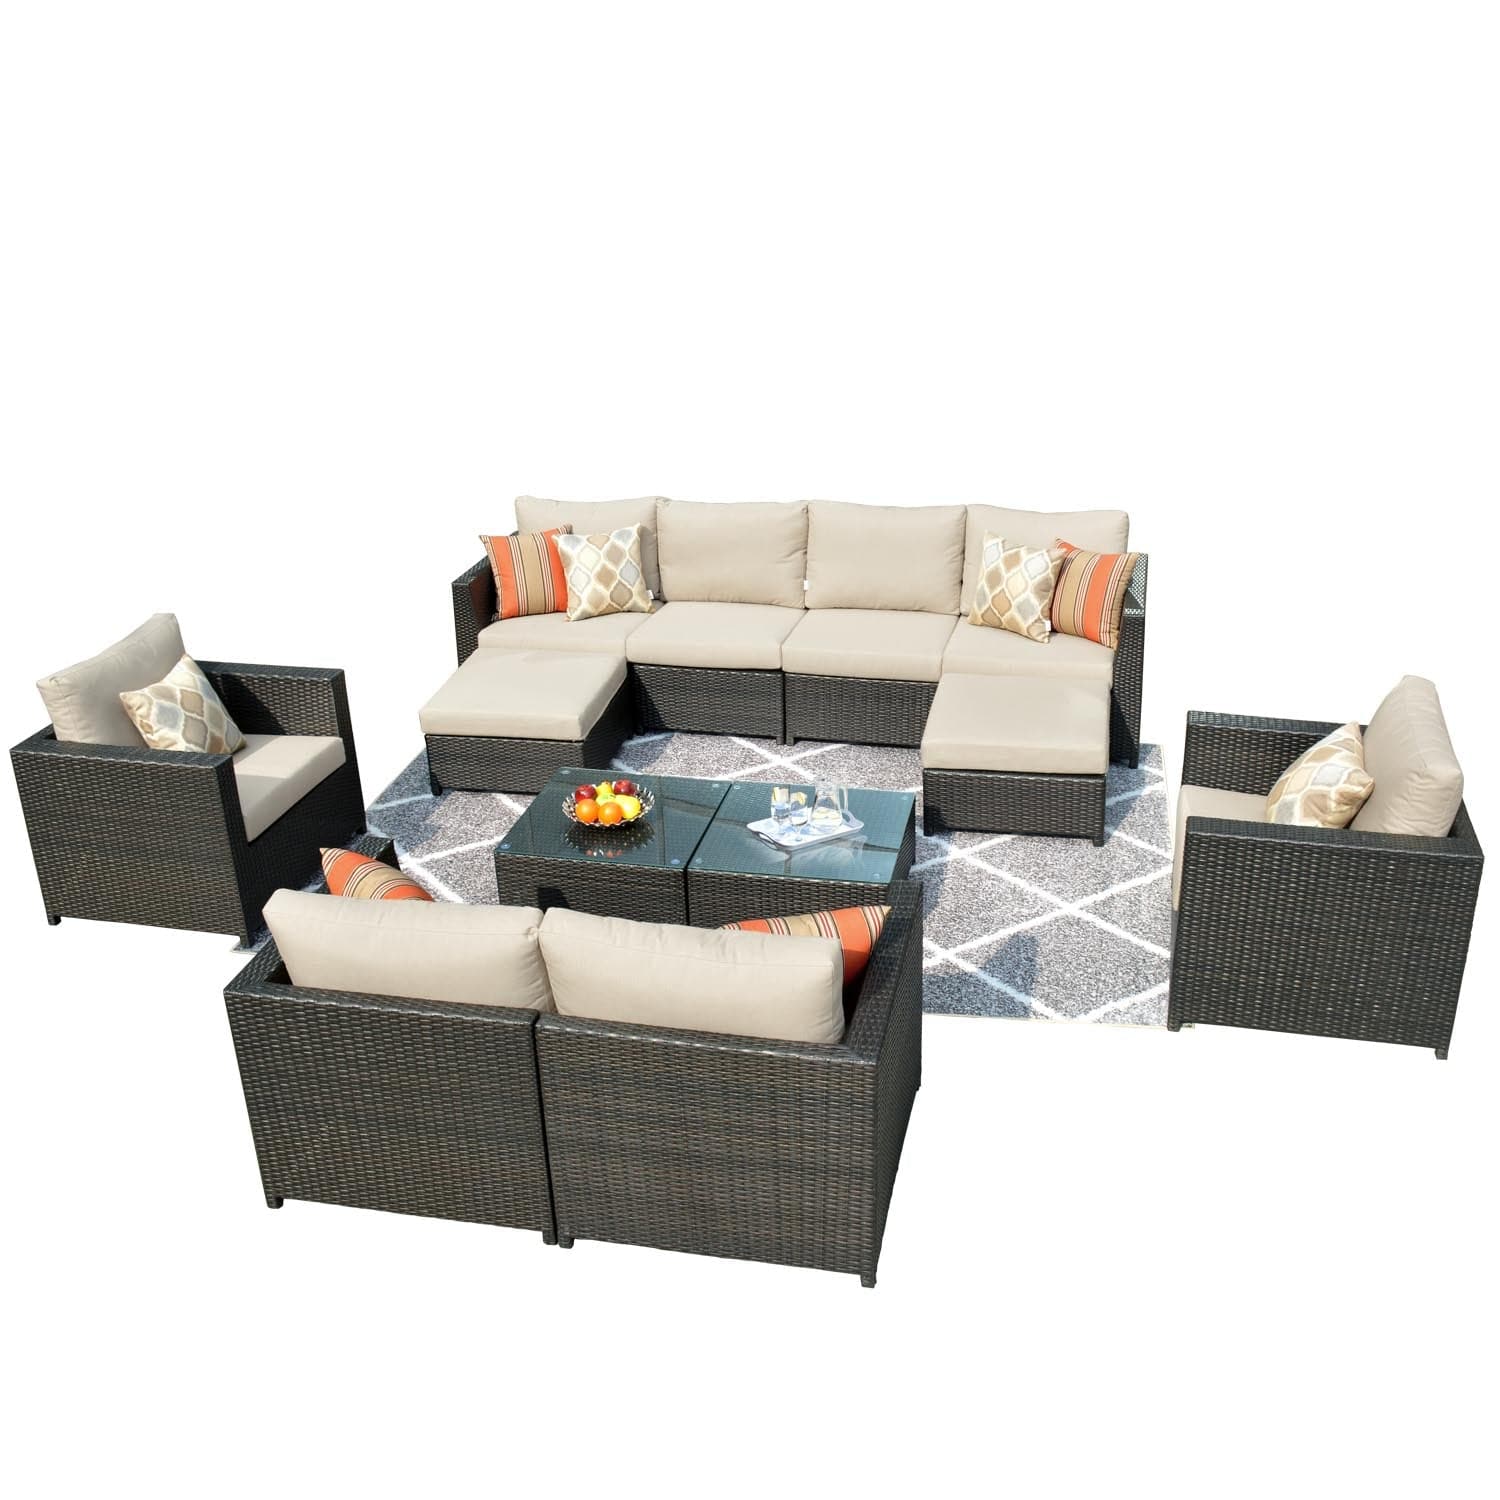 Ovios Patio Furniture Set Bigger Size Sunbrella 12-Piece, King Series, Fully Assembled, Couch is Separate